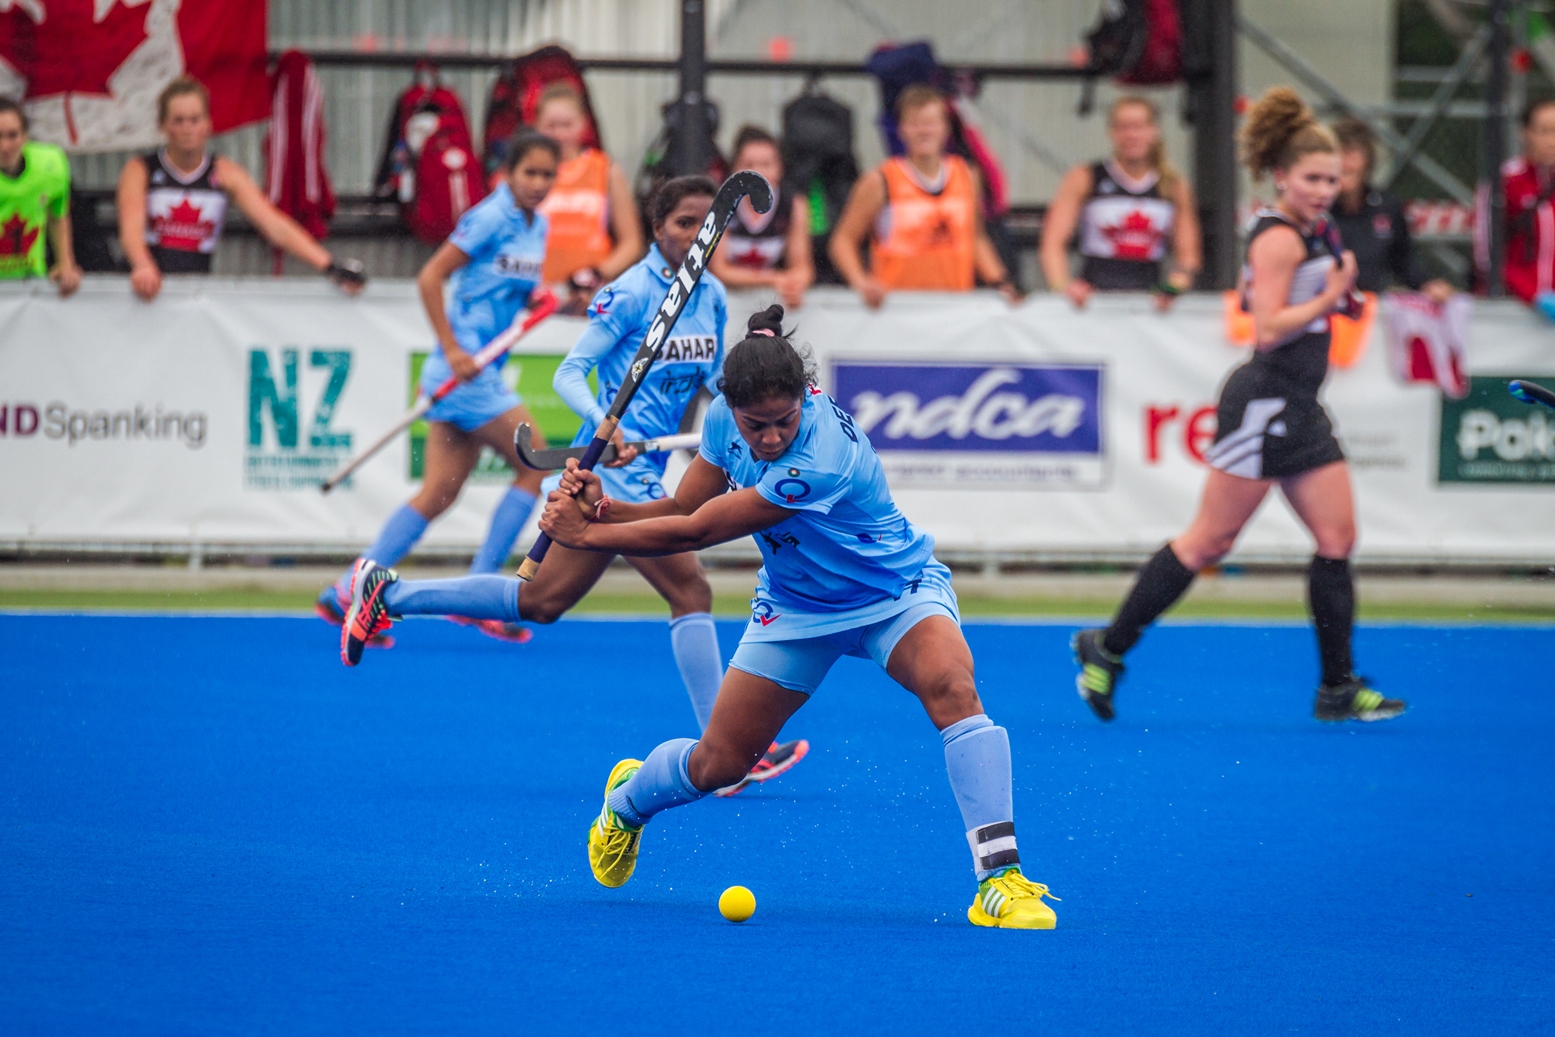 Indian Women's Hockey Team lose 1-2 to New Zealand